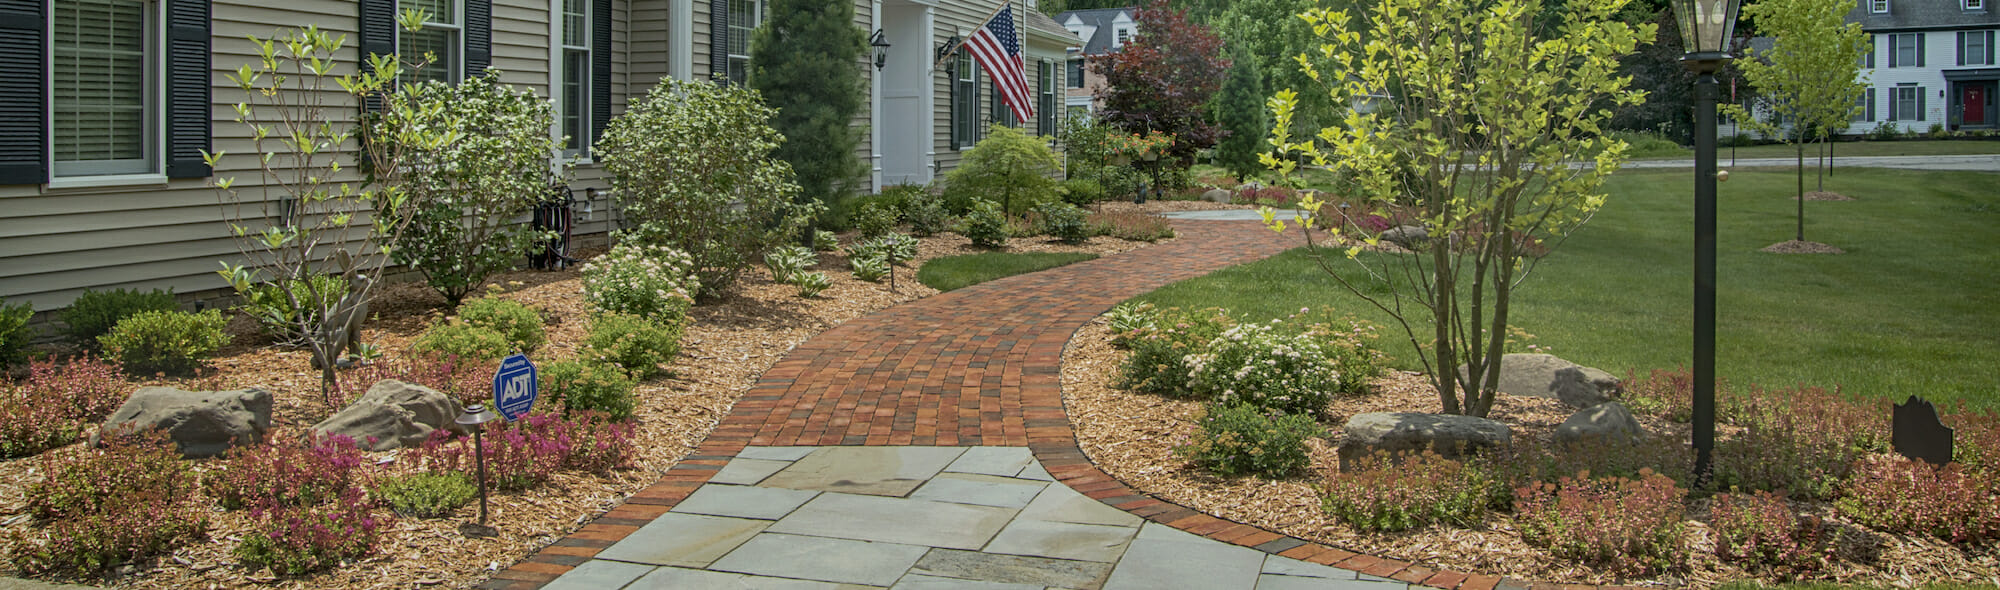 Landscape Company Cleveland Chagrin, Pattie Group Landscaping